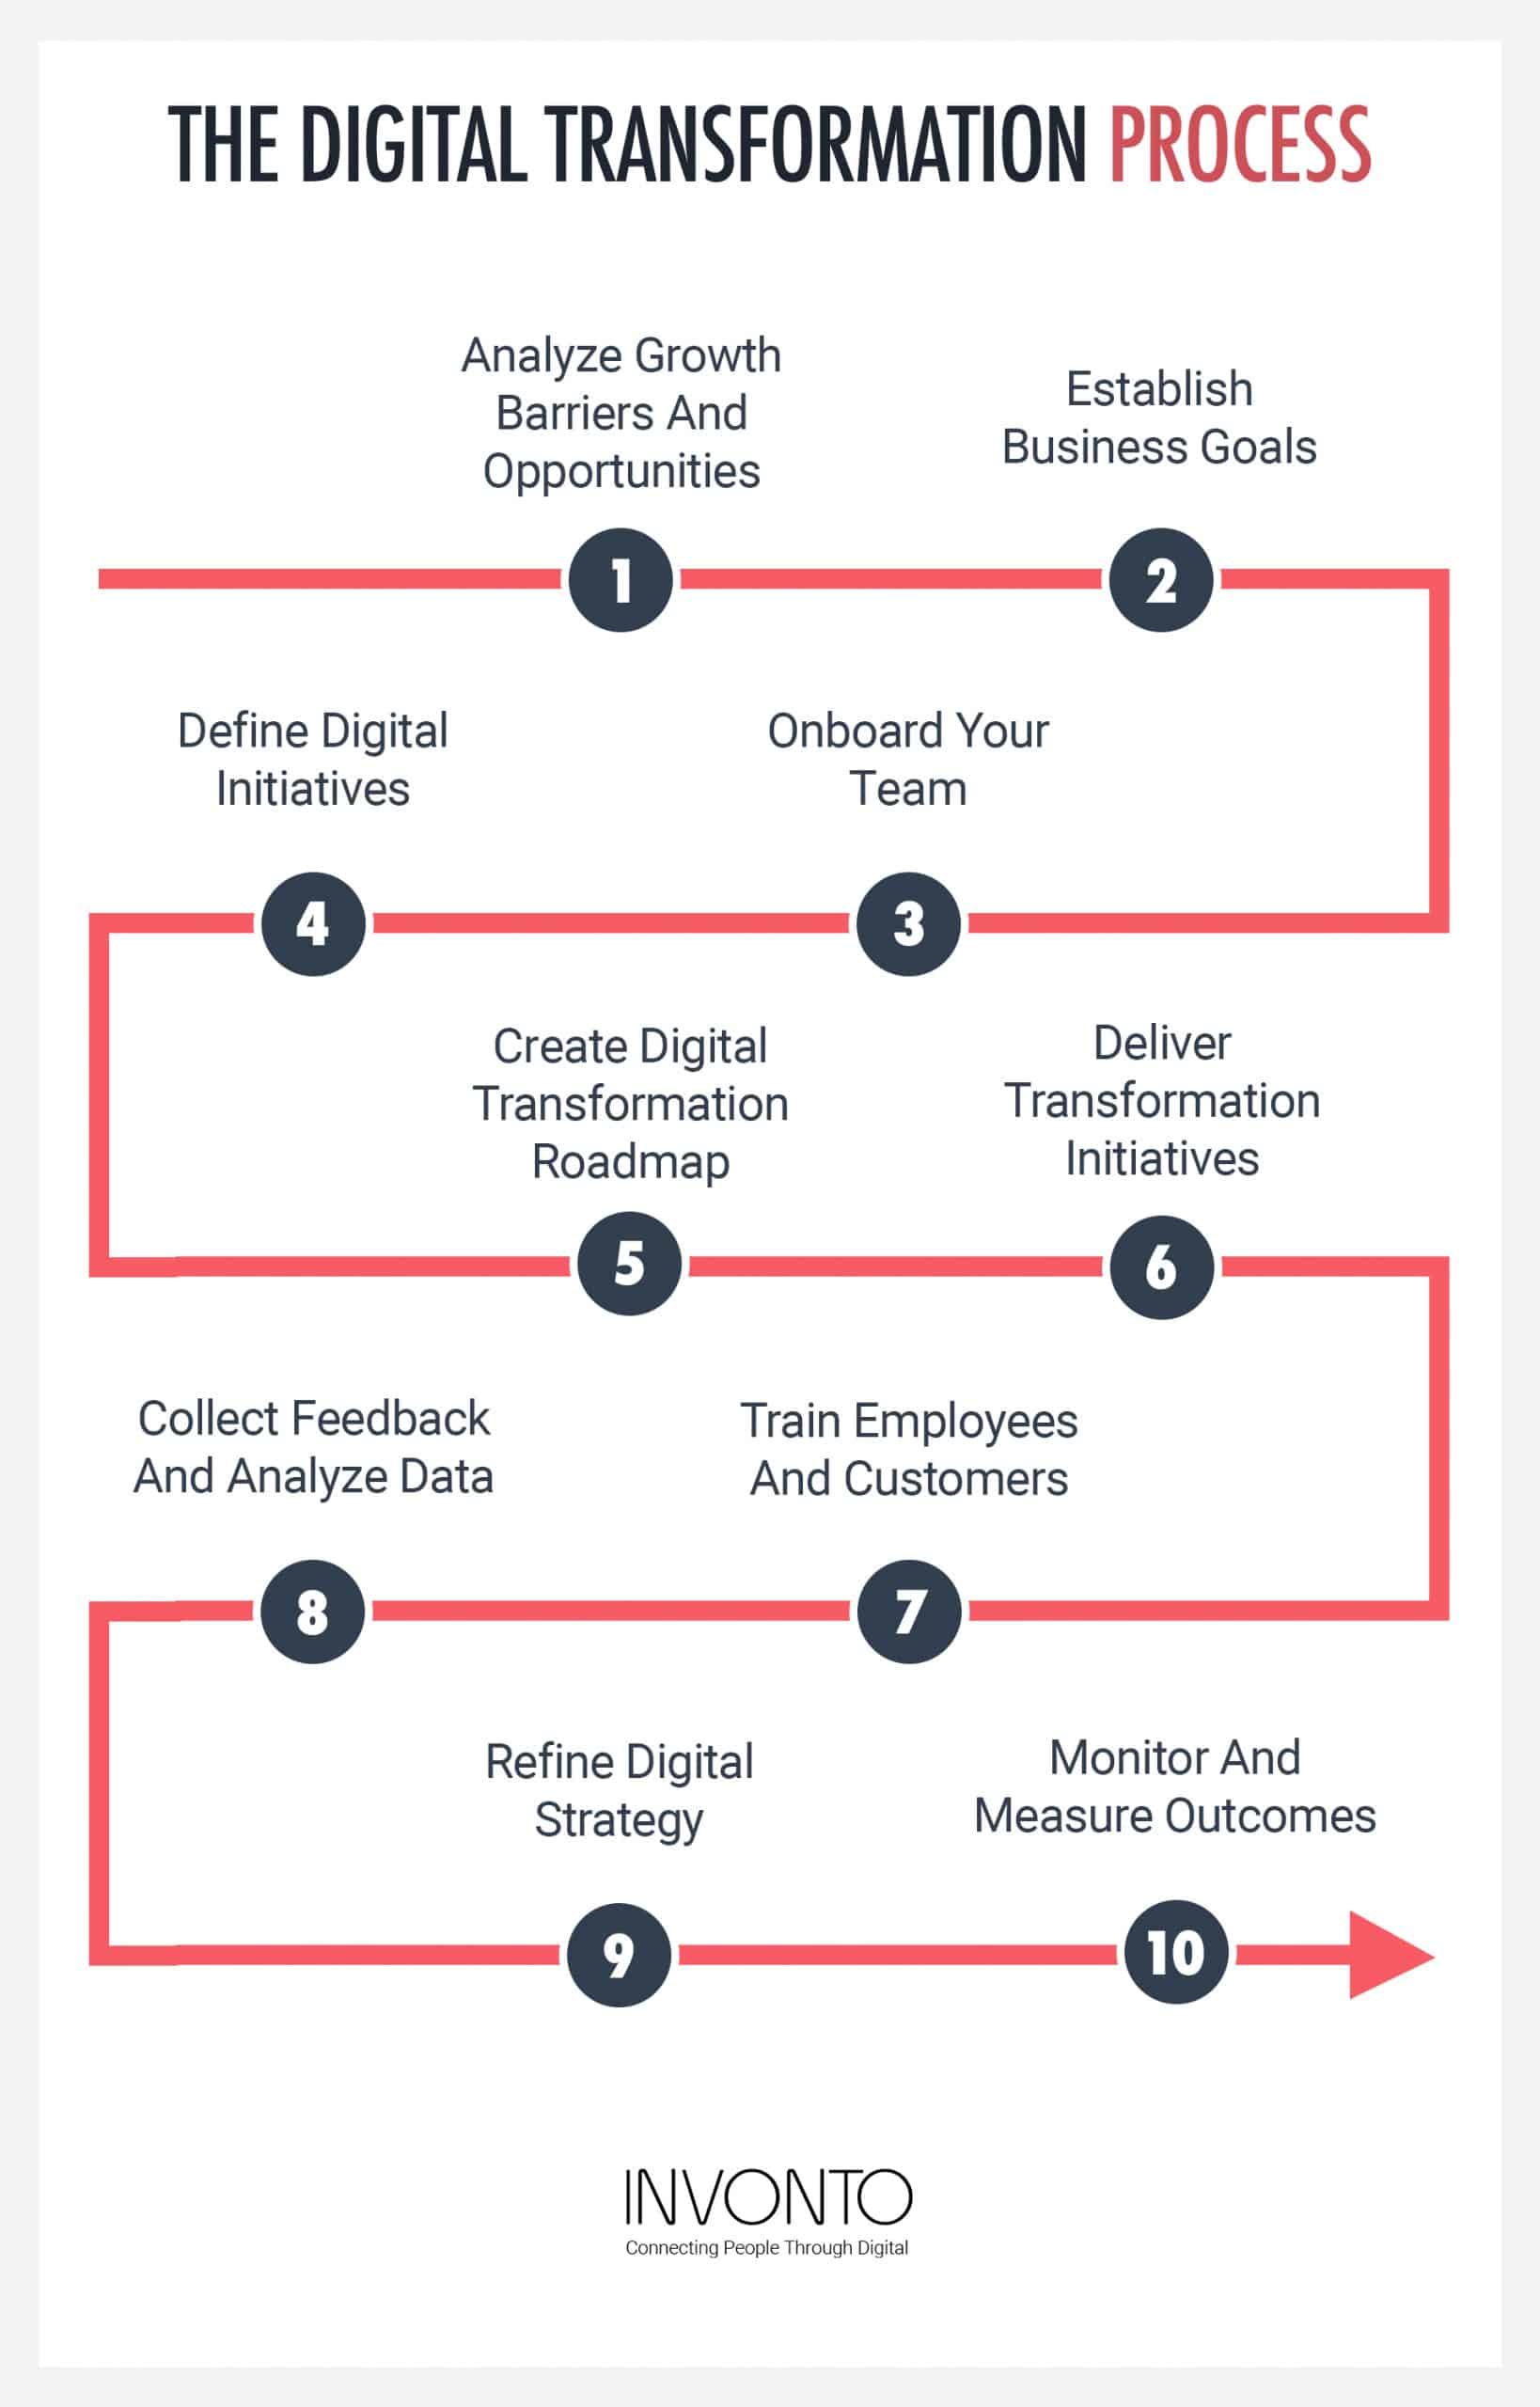 The digital transformation process designed by Invonto